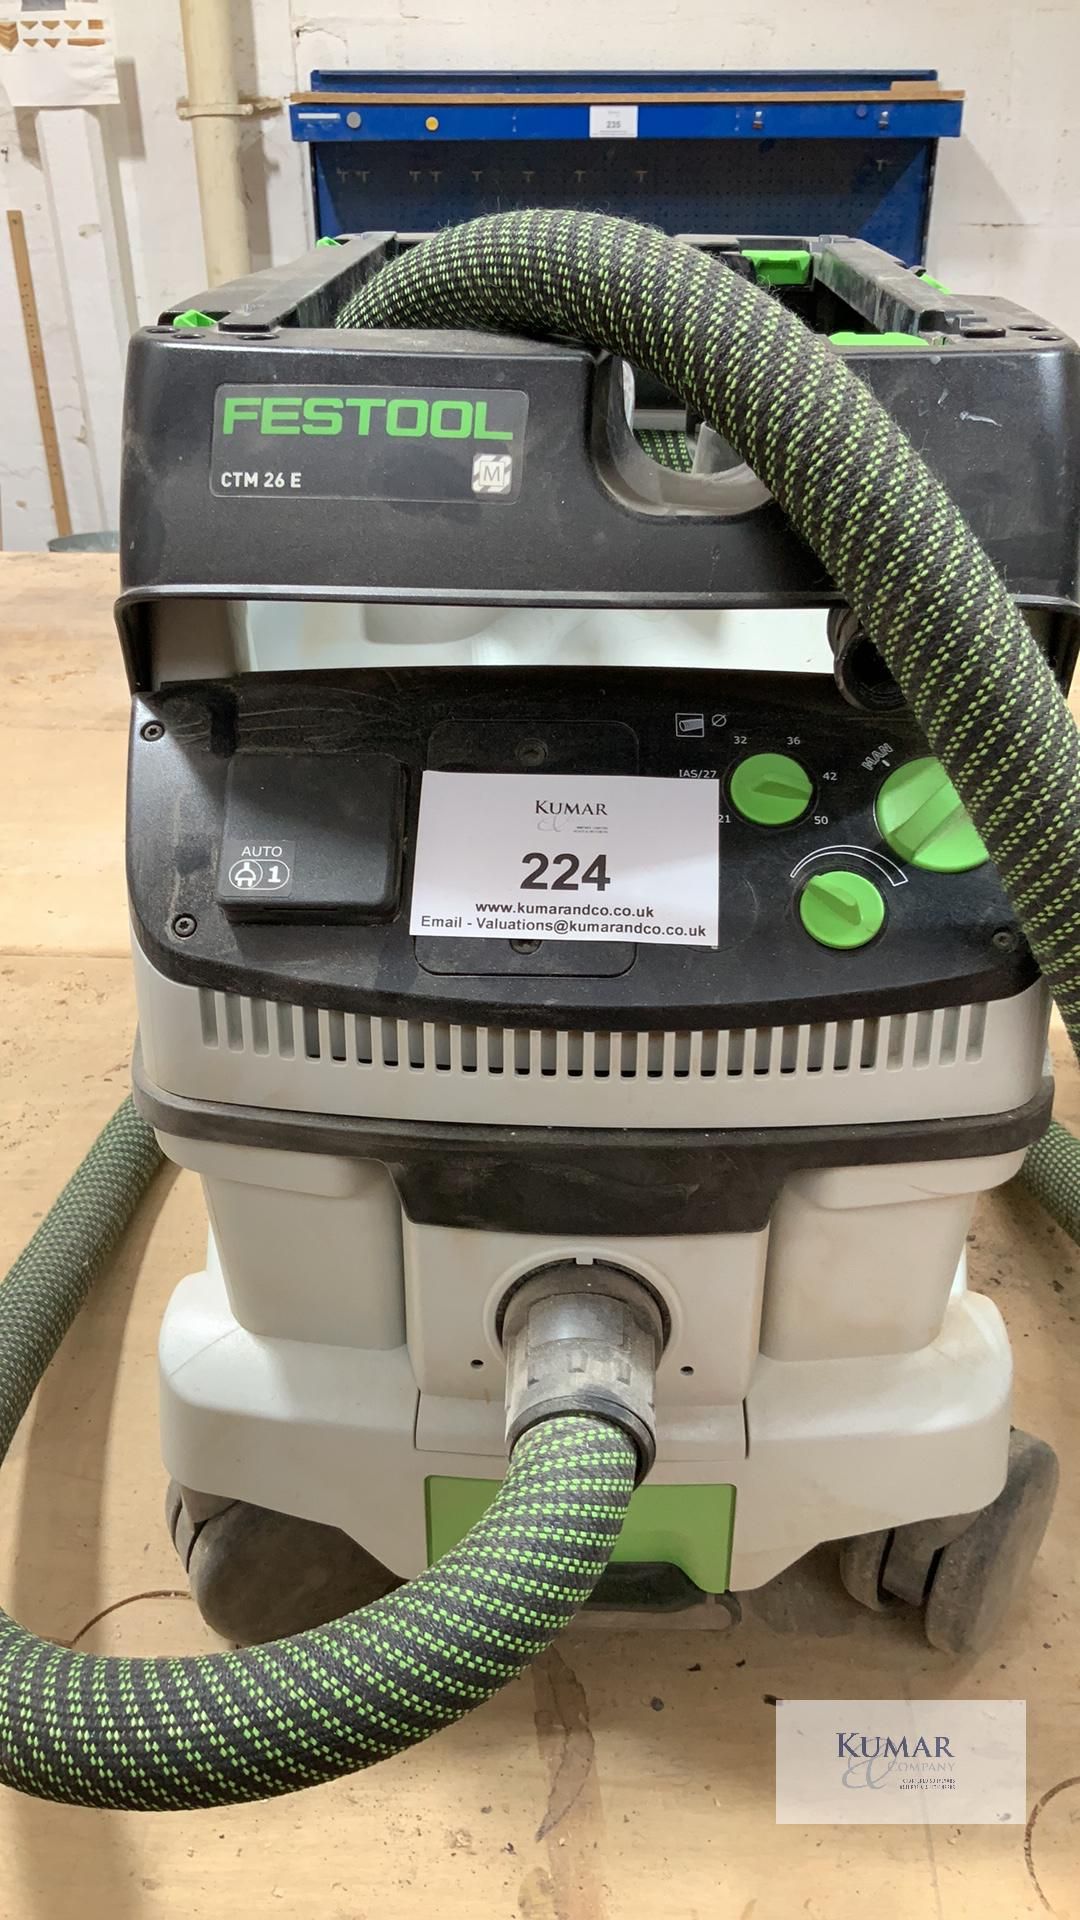 Festoon Cleantec CTM 26 E Mobile Dust Extraction unit 240v - Believed to be 2019